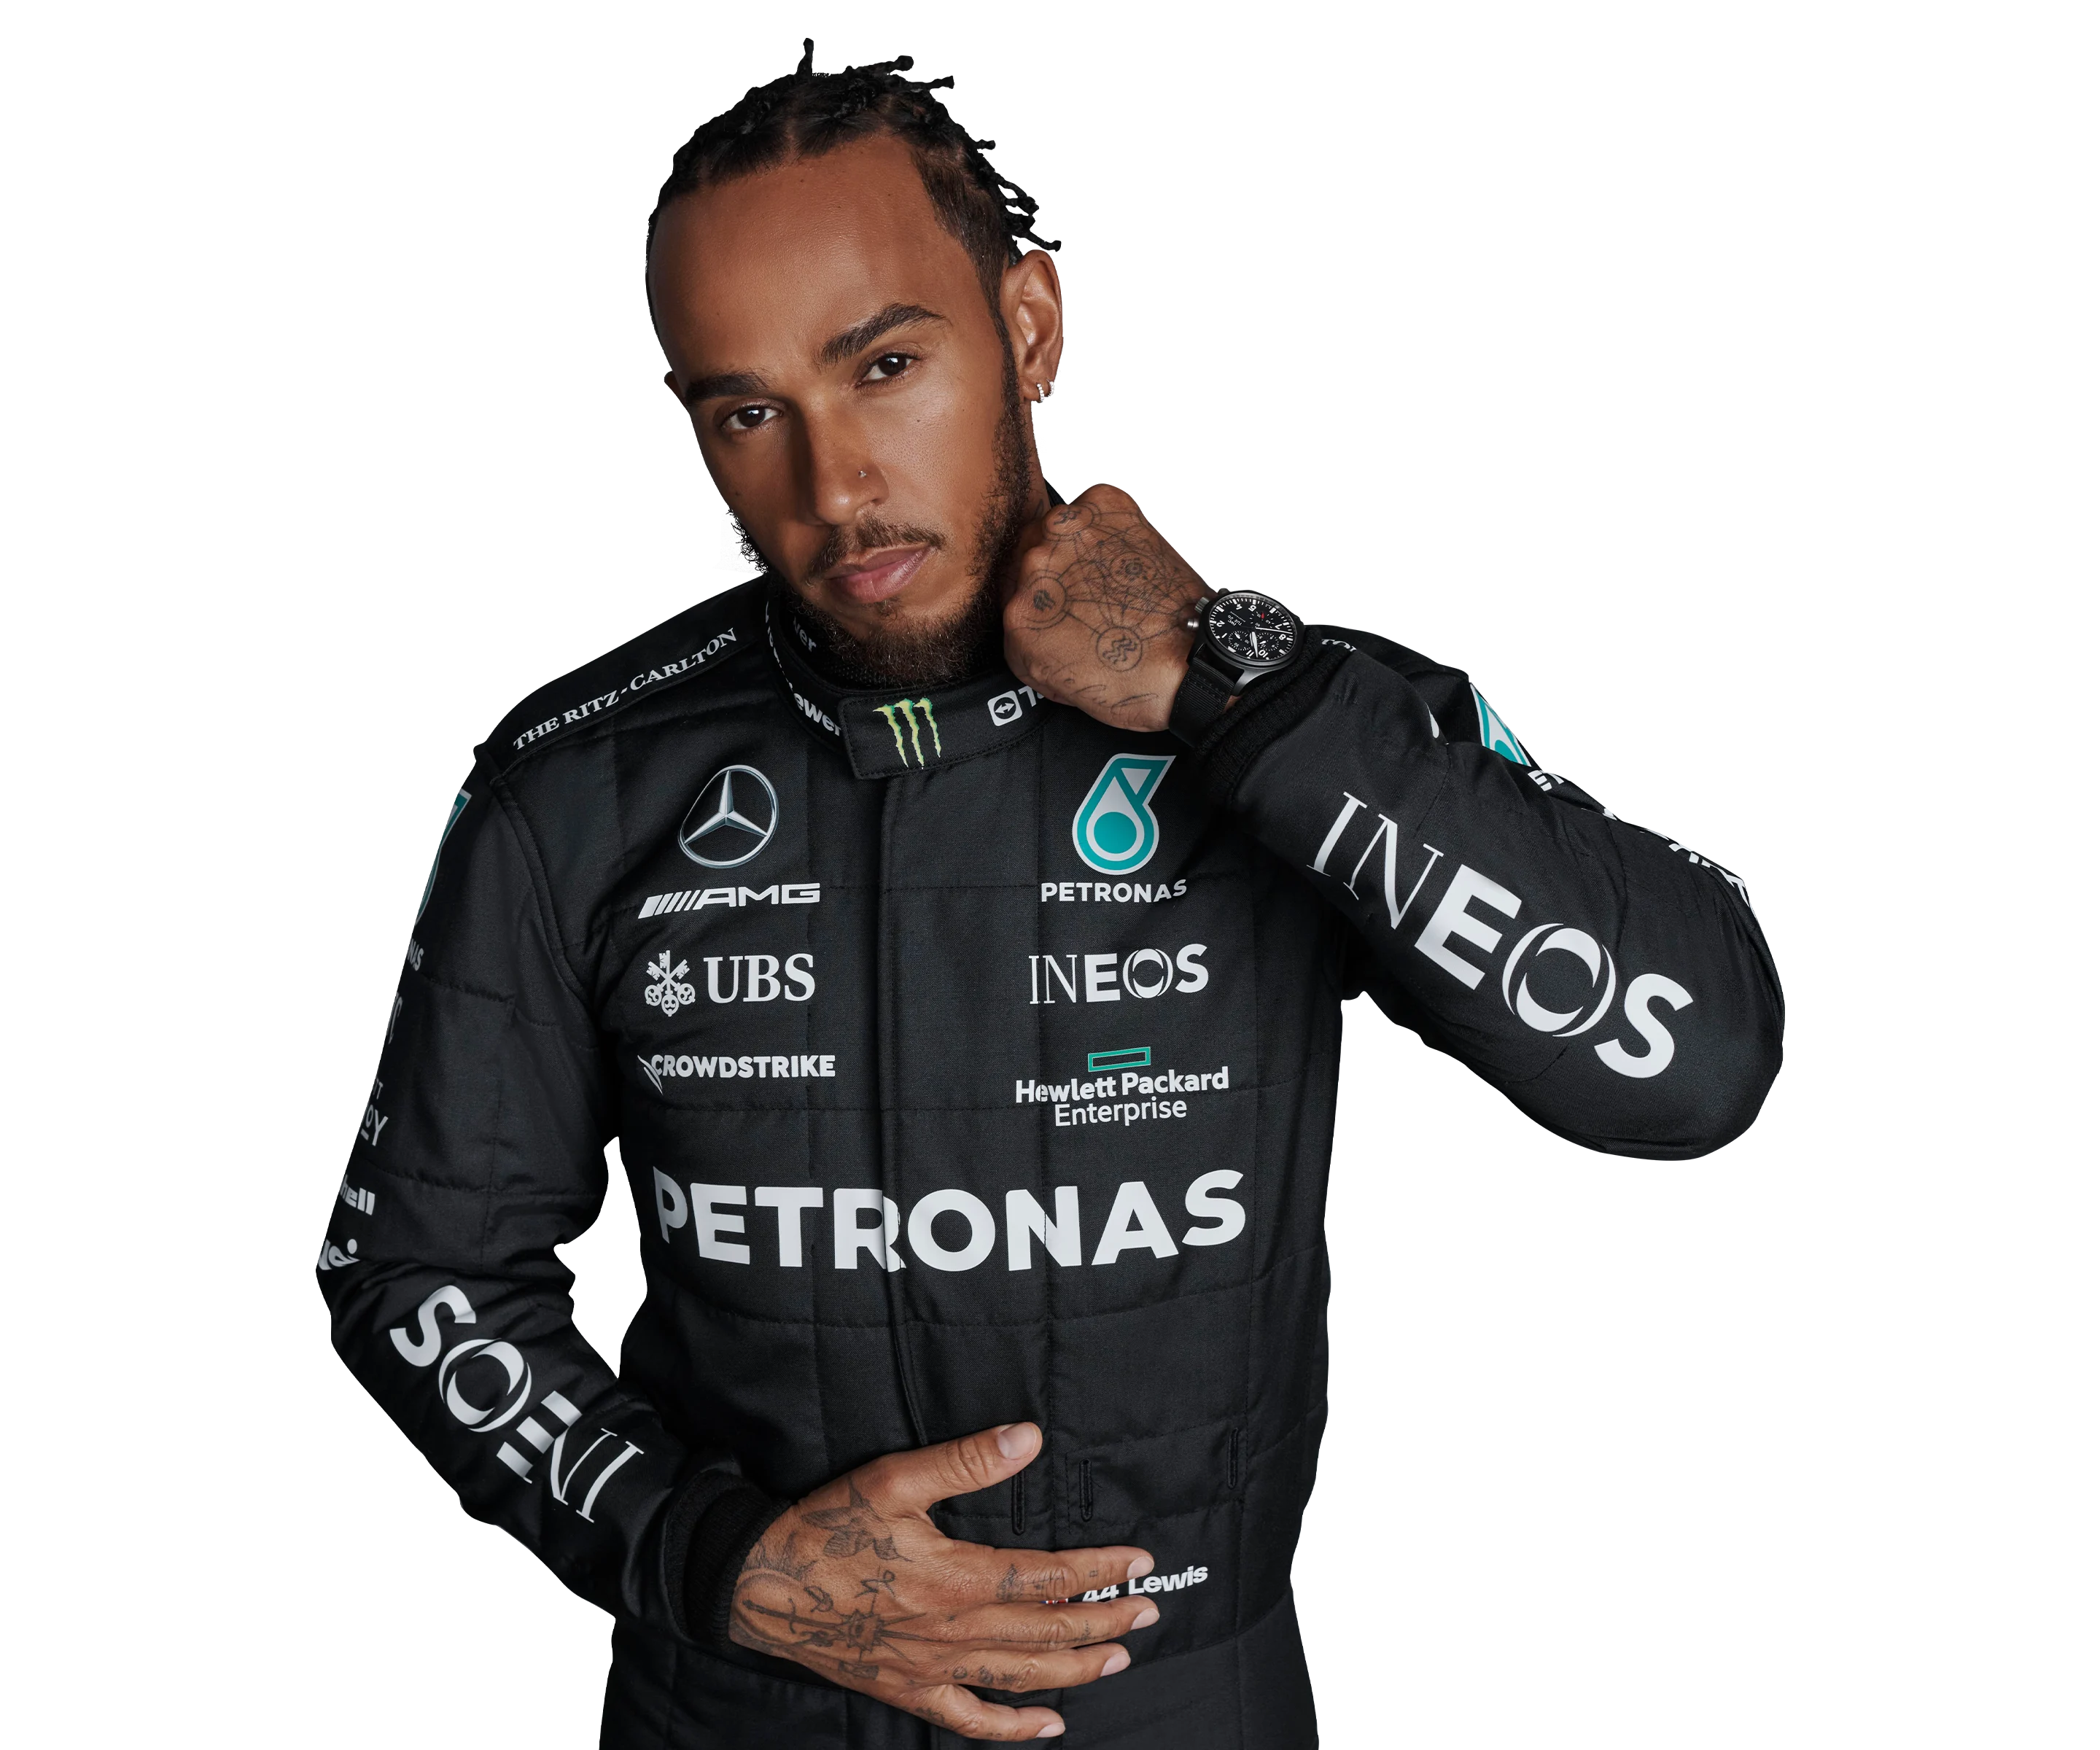 Lewis Hamilton officially crowned F1 2018 world champion